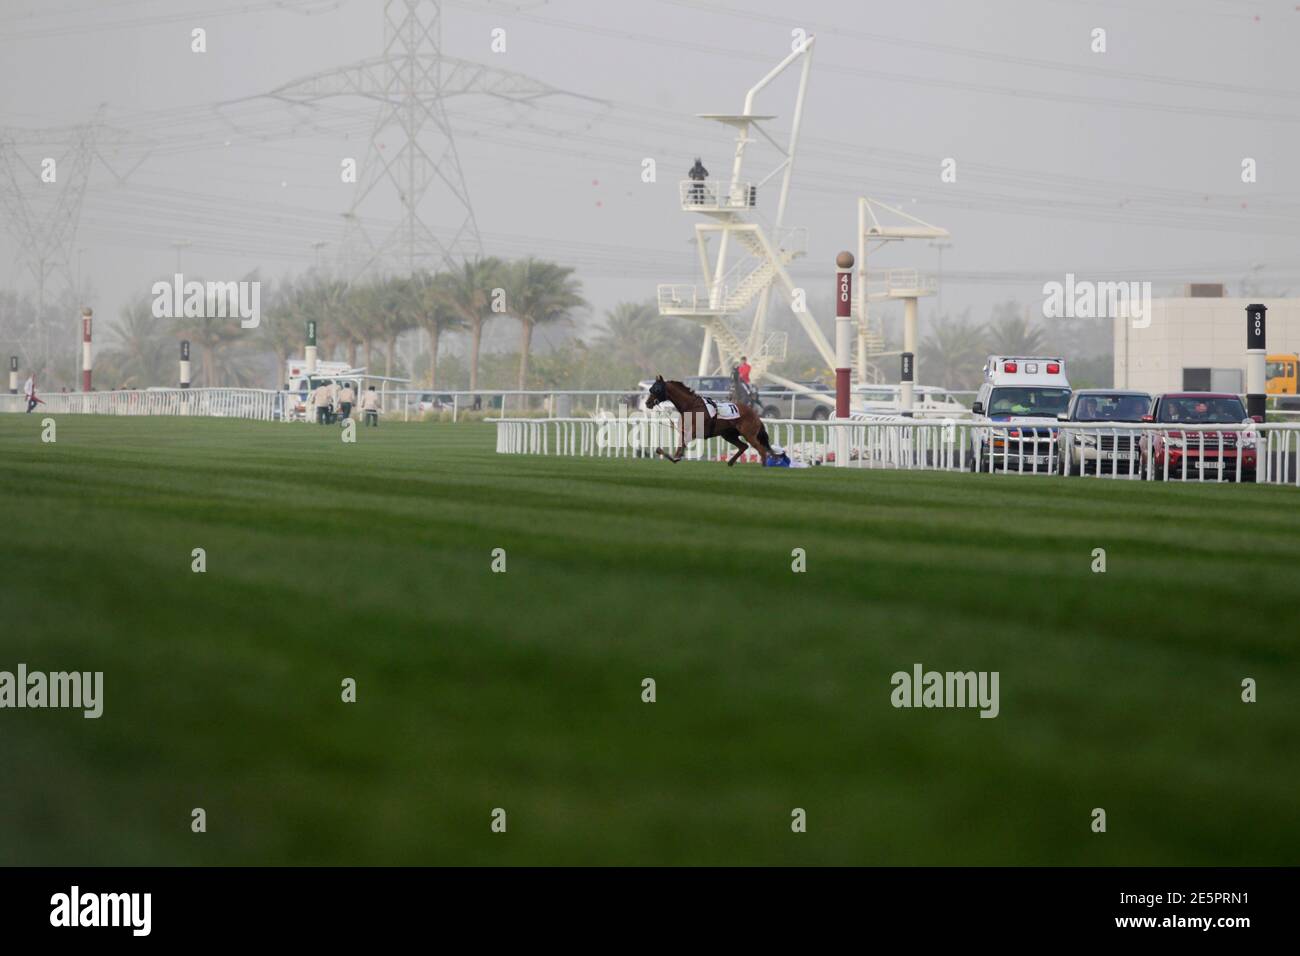 Fox Hunt of Ireland, ridden by Silvestre De Sousa, falls as it breaks its leg while competing in the third race during the 17th Dubai World Cup at the Meydan racecourse in Dubai March 31, 2012. The Dubai World Cup, with a cash prize of $10 million, is horse racing's richest race. REUTERS/Caren Firouz (UNITED ARAB EMIRATES - Tags: SPORT HORSE RACING) Stock Photo